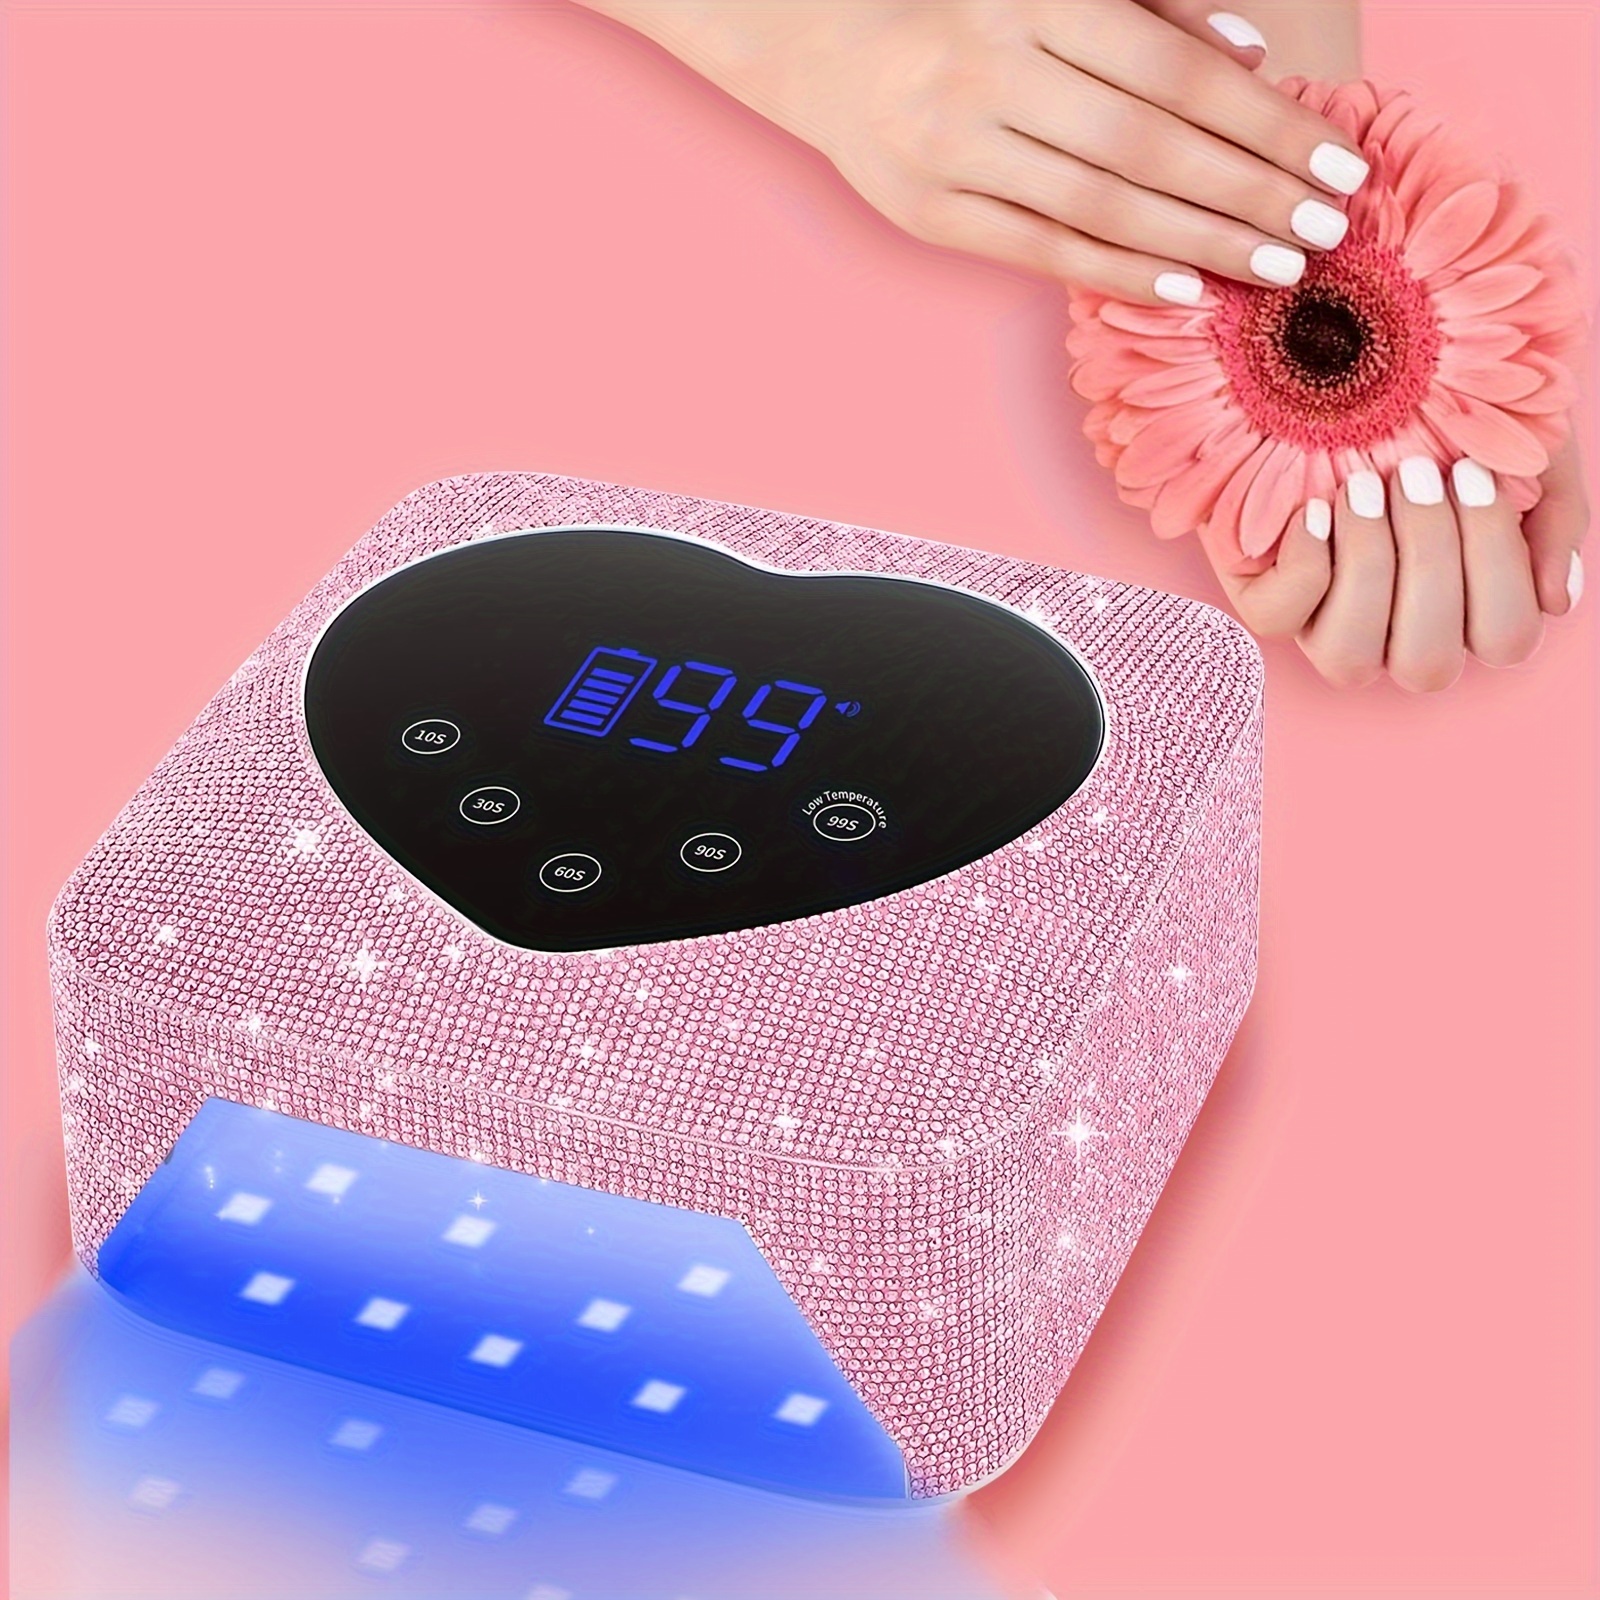 

Rechargeable 72w Cordless Uv Nail Lamp - Fast Drying, 5 Timer Settings, Touch Control & Auto Sensor - Ideal For Gel Nail Polish, Salon-quality Nails At Home